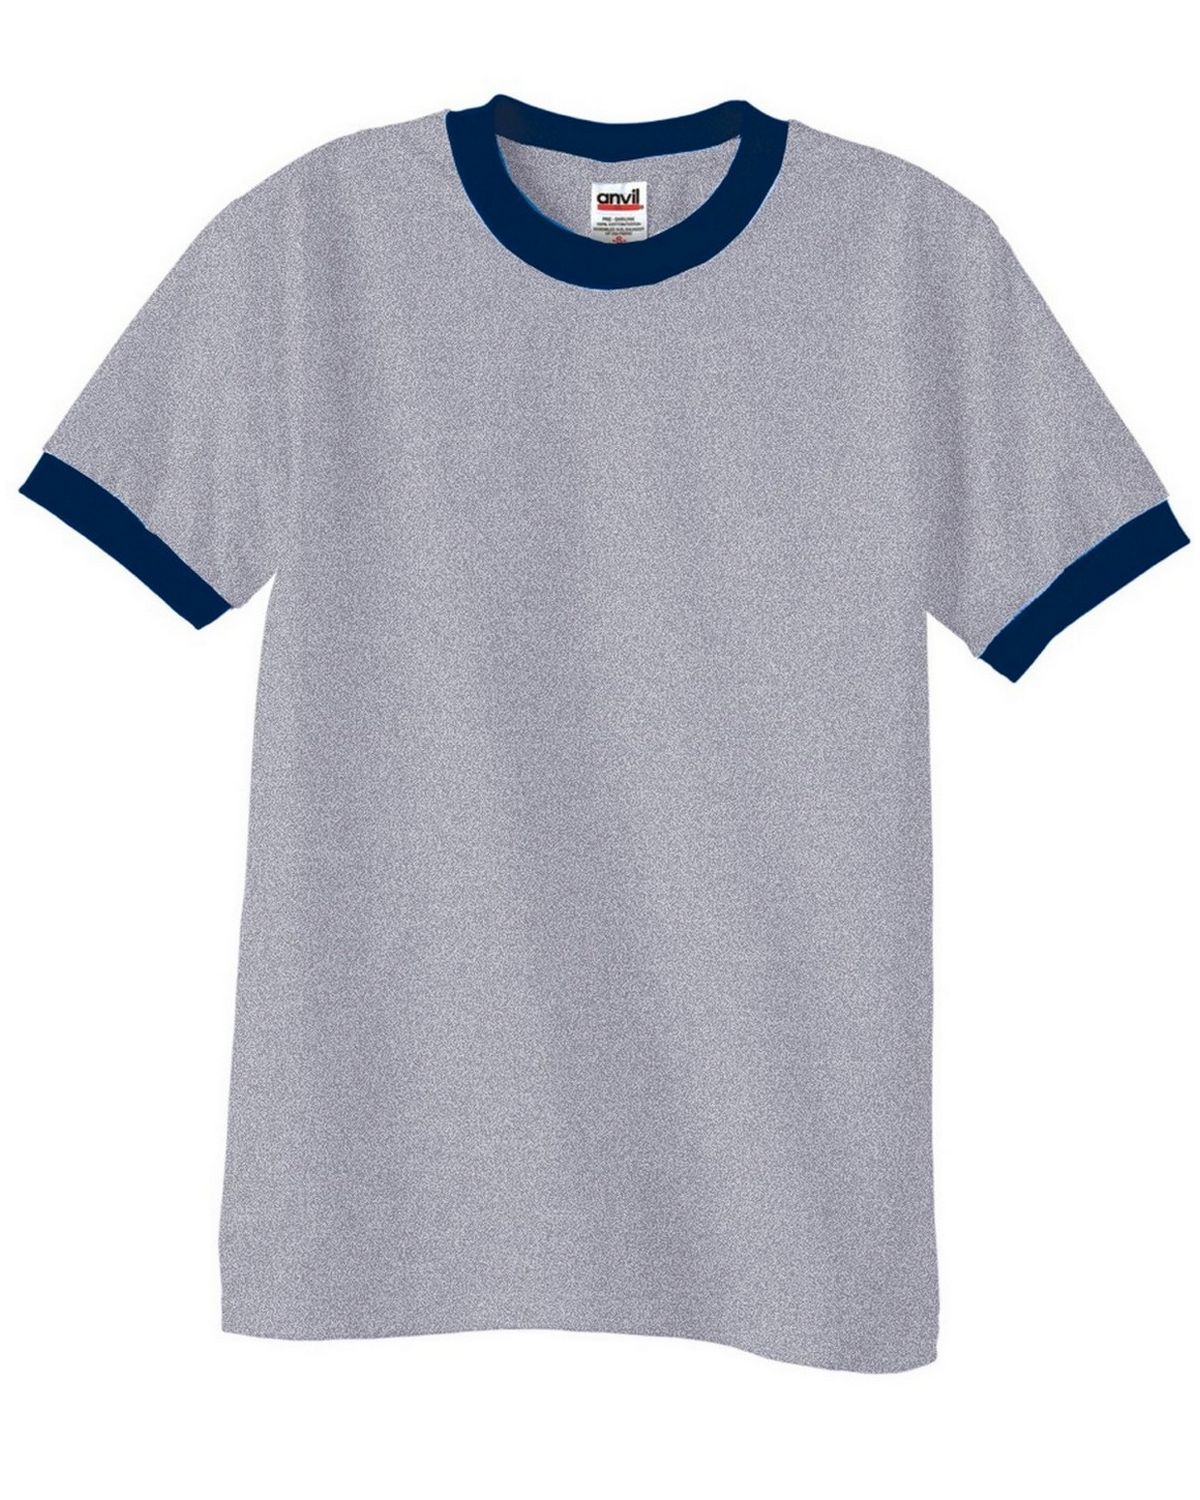 Selected Color is Heather Grey/Navy